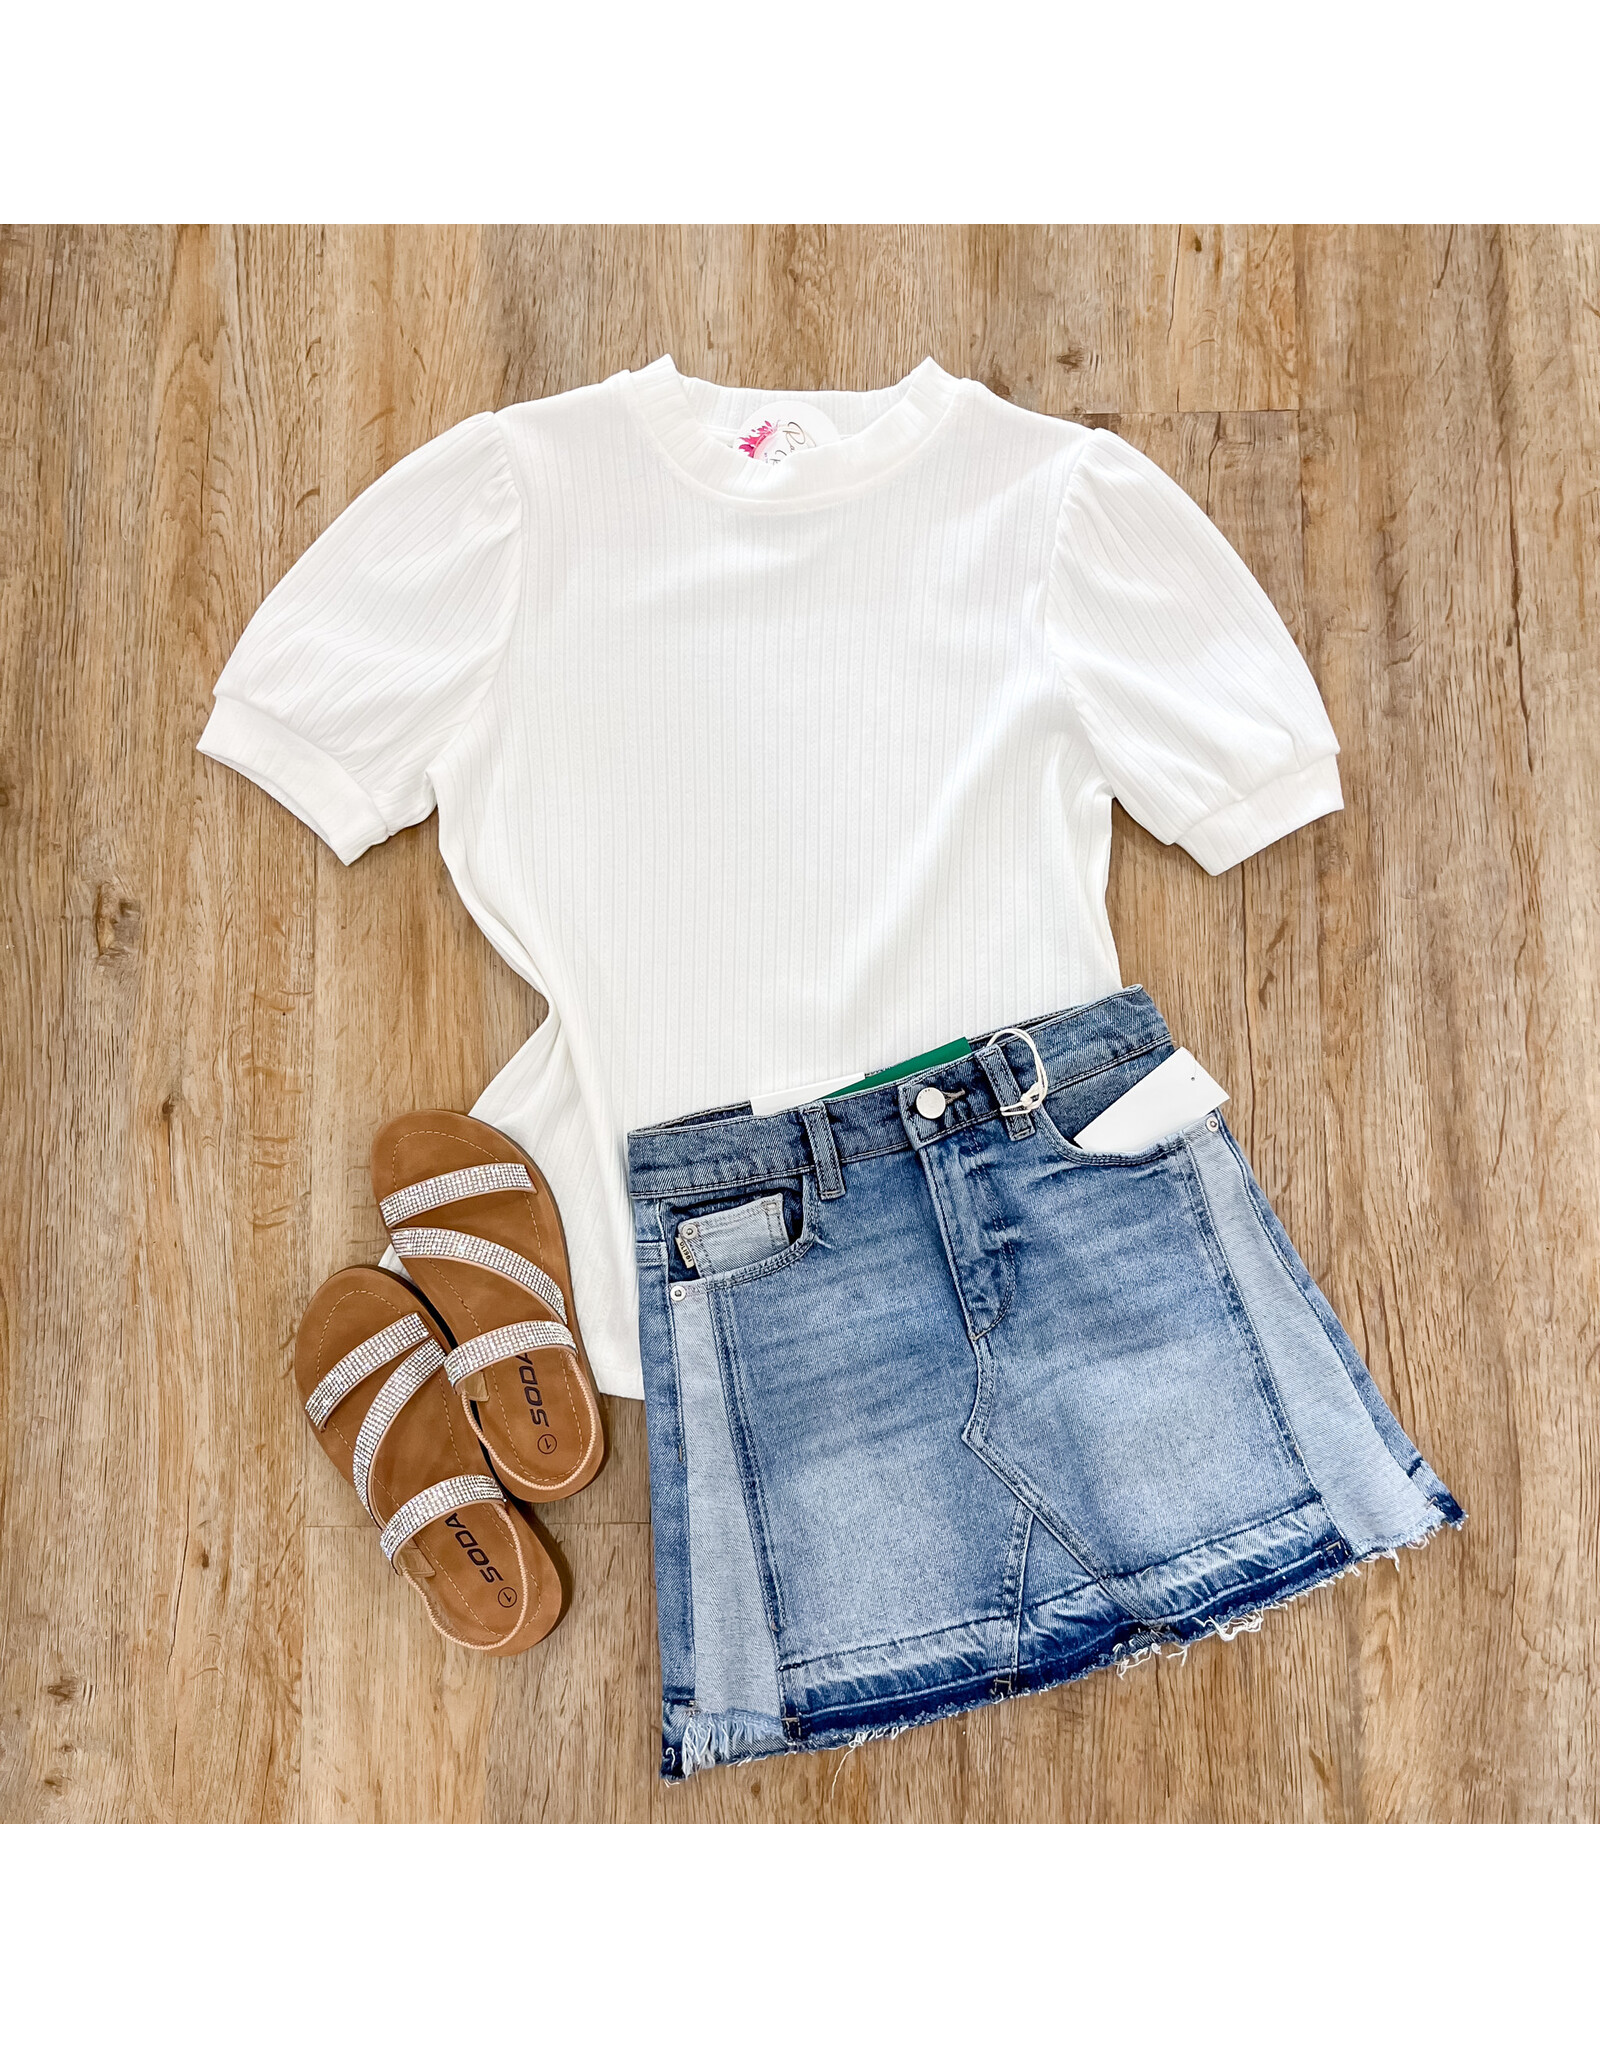 Tween Off White Textured Banded Top